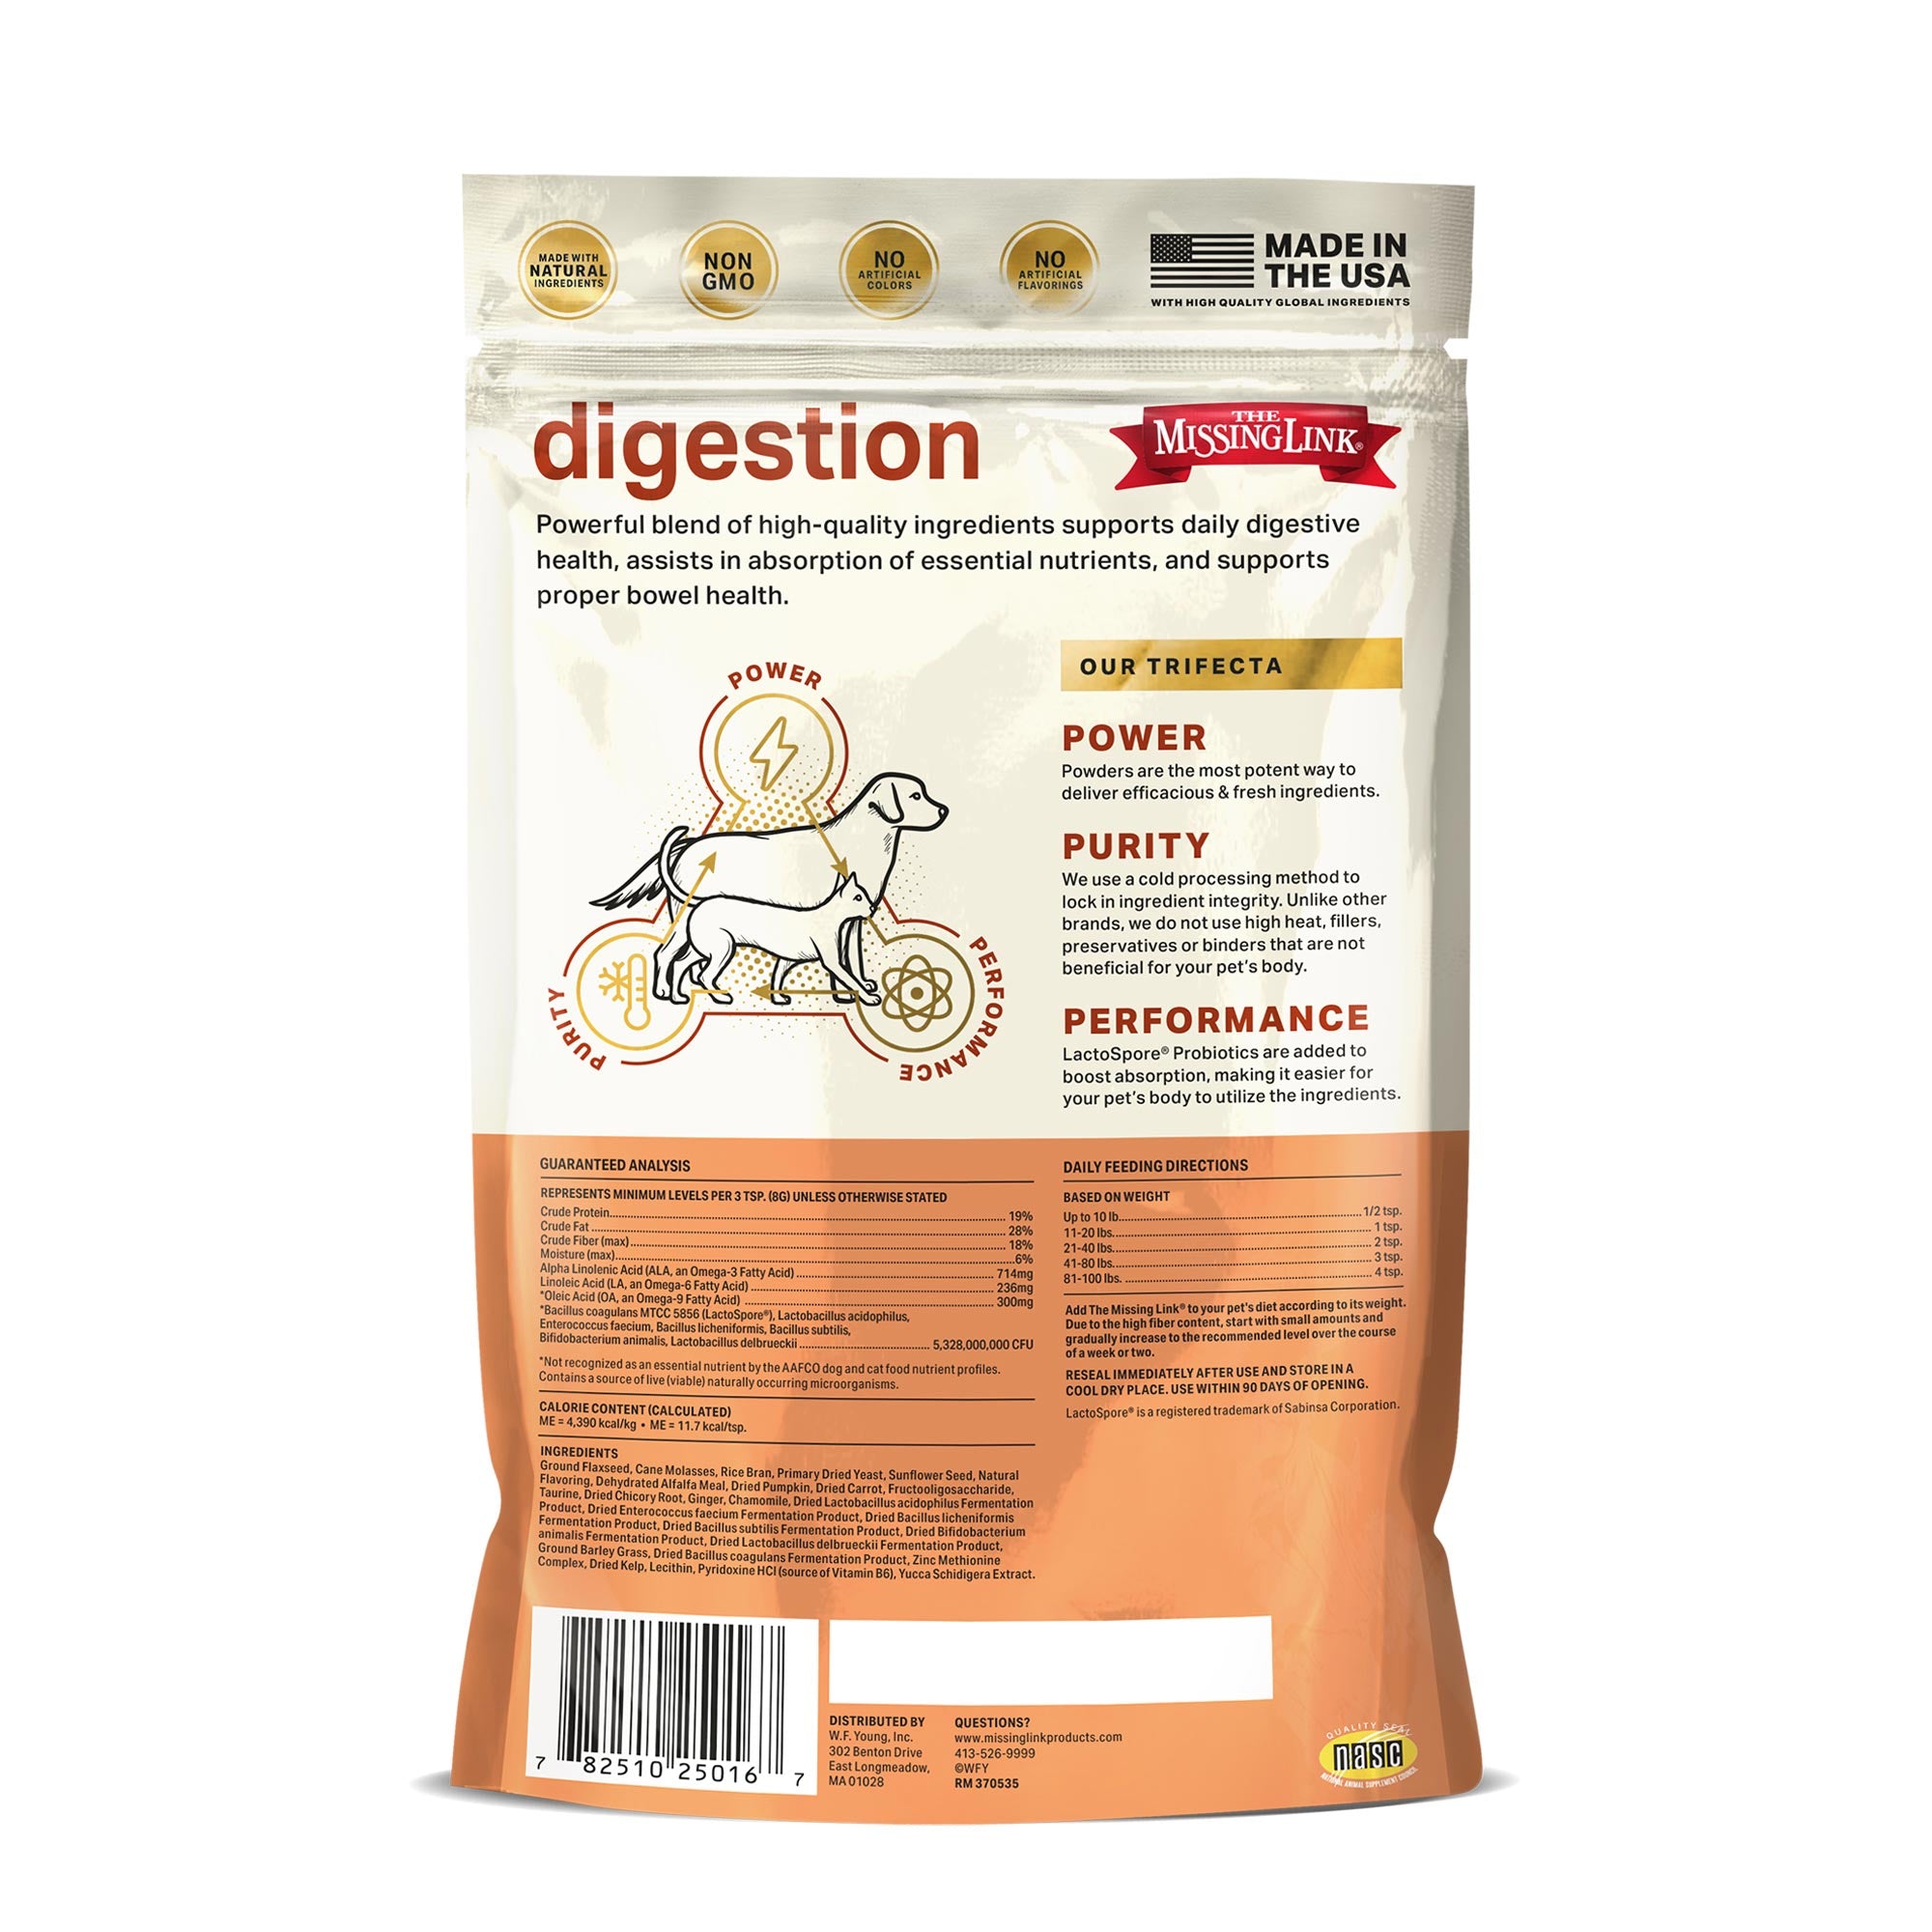 The Missing Link Digestion, our trifecta power, purity and performance back of bag.